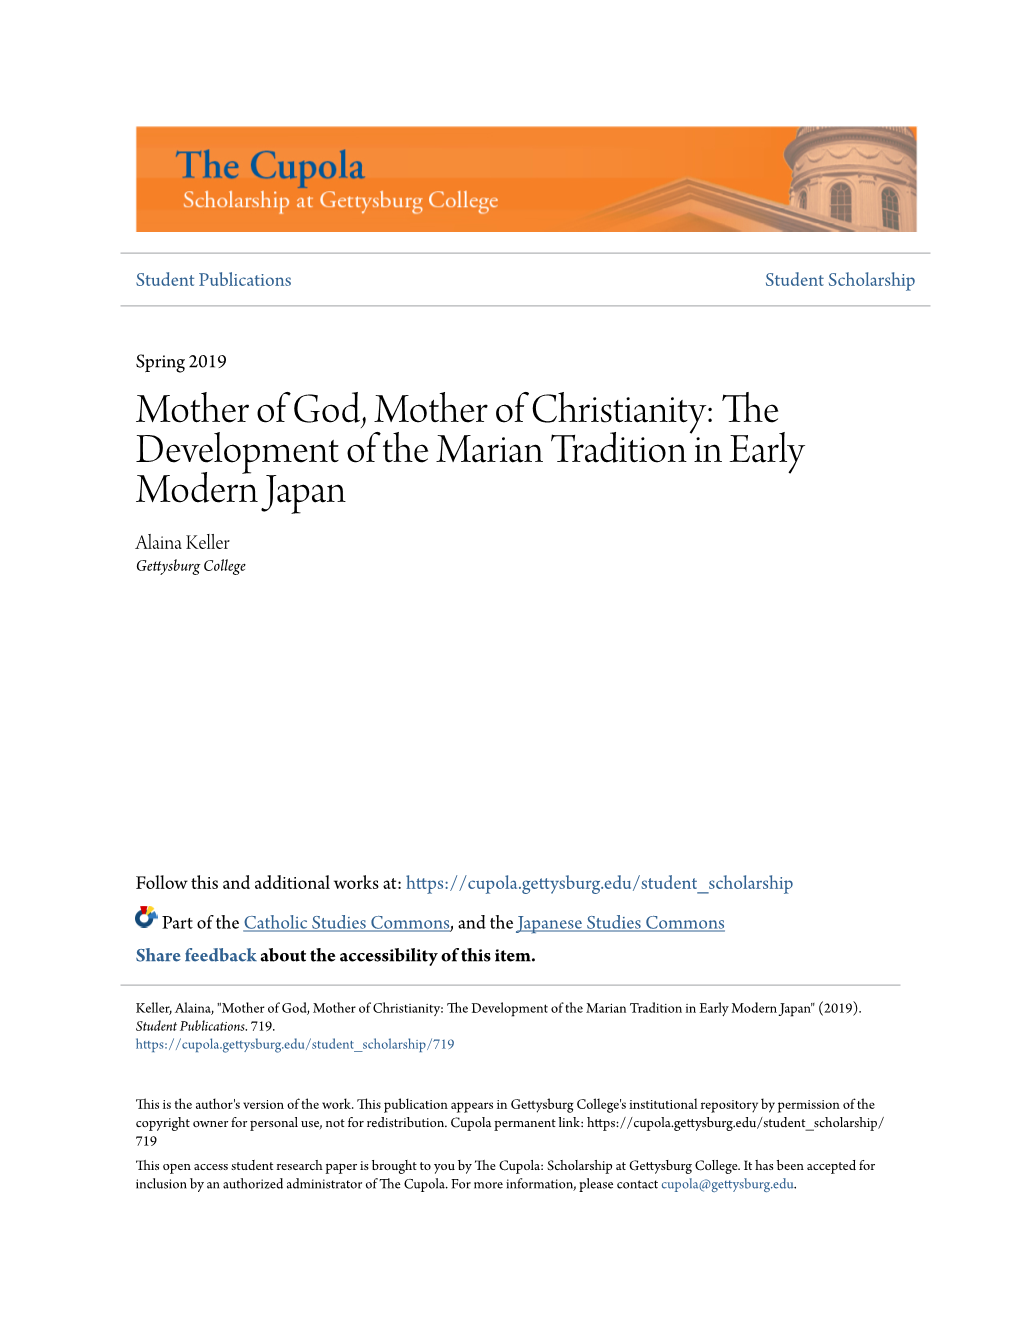 Mother of God, Mother of Christianity: the Development of the Marian Tradition in Early Modern Japan Alaina Keller Gettysburg College